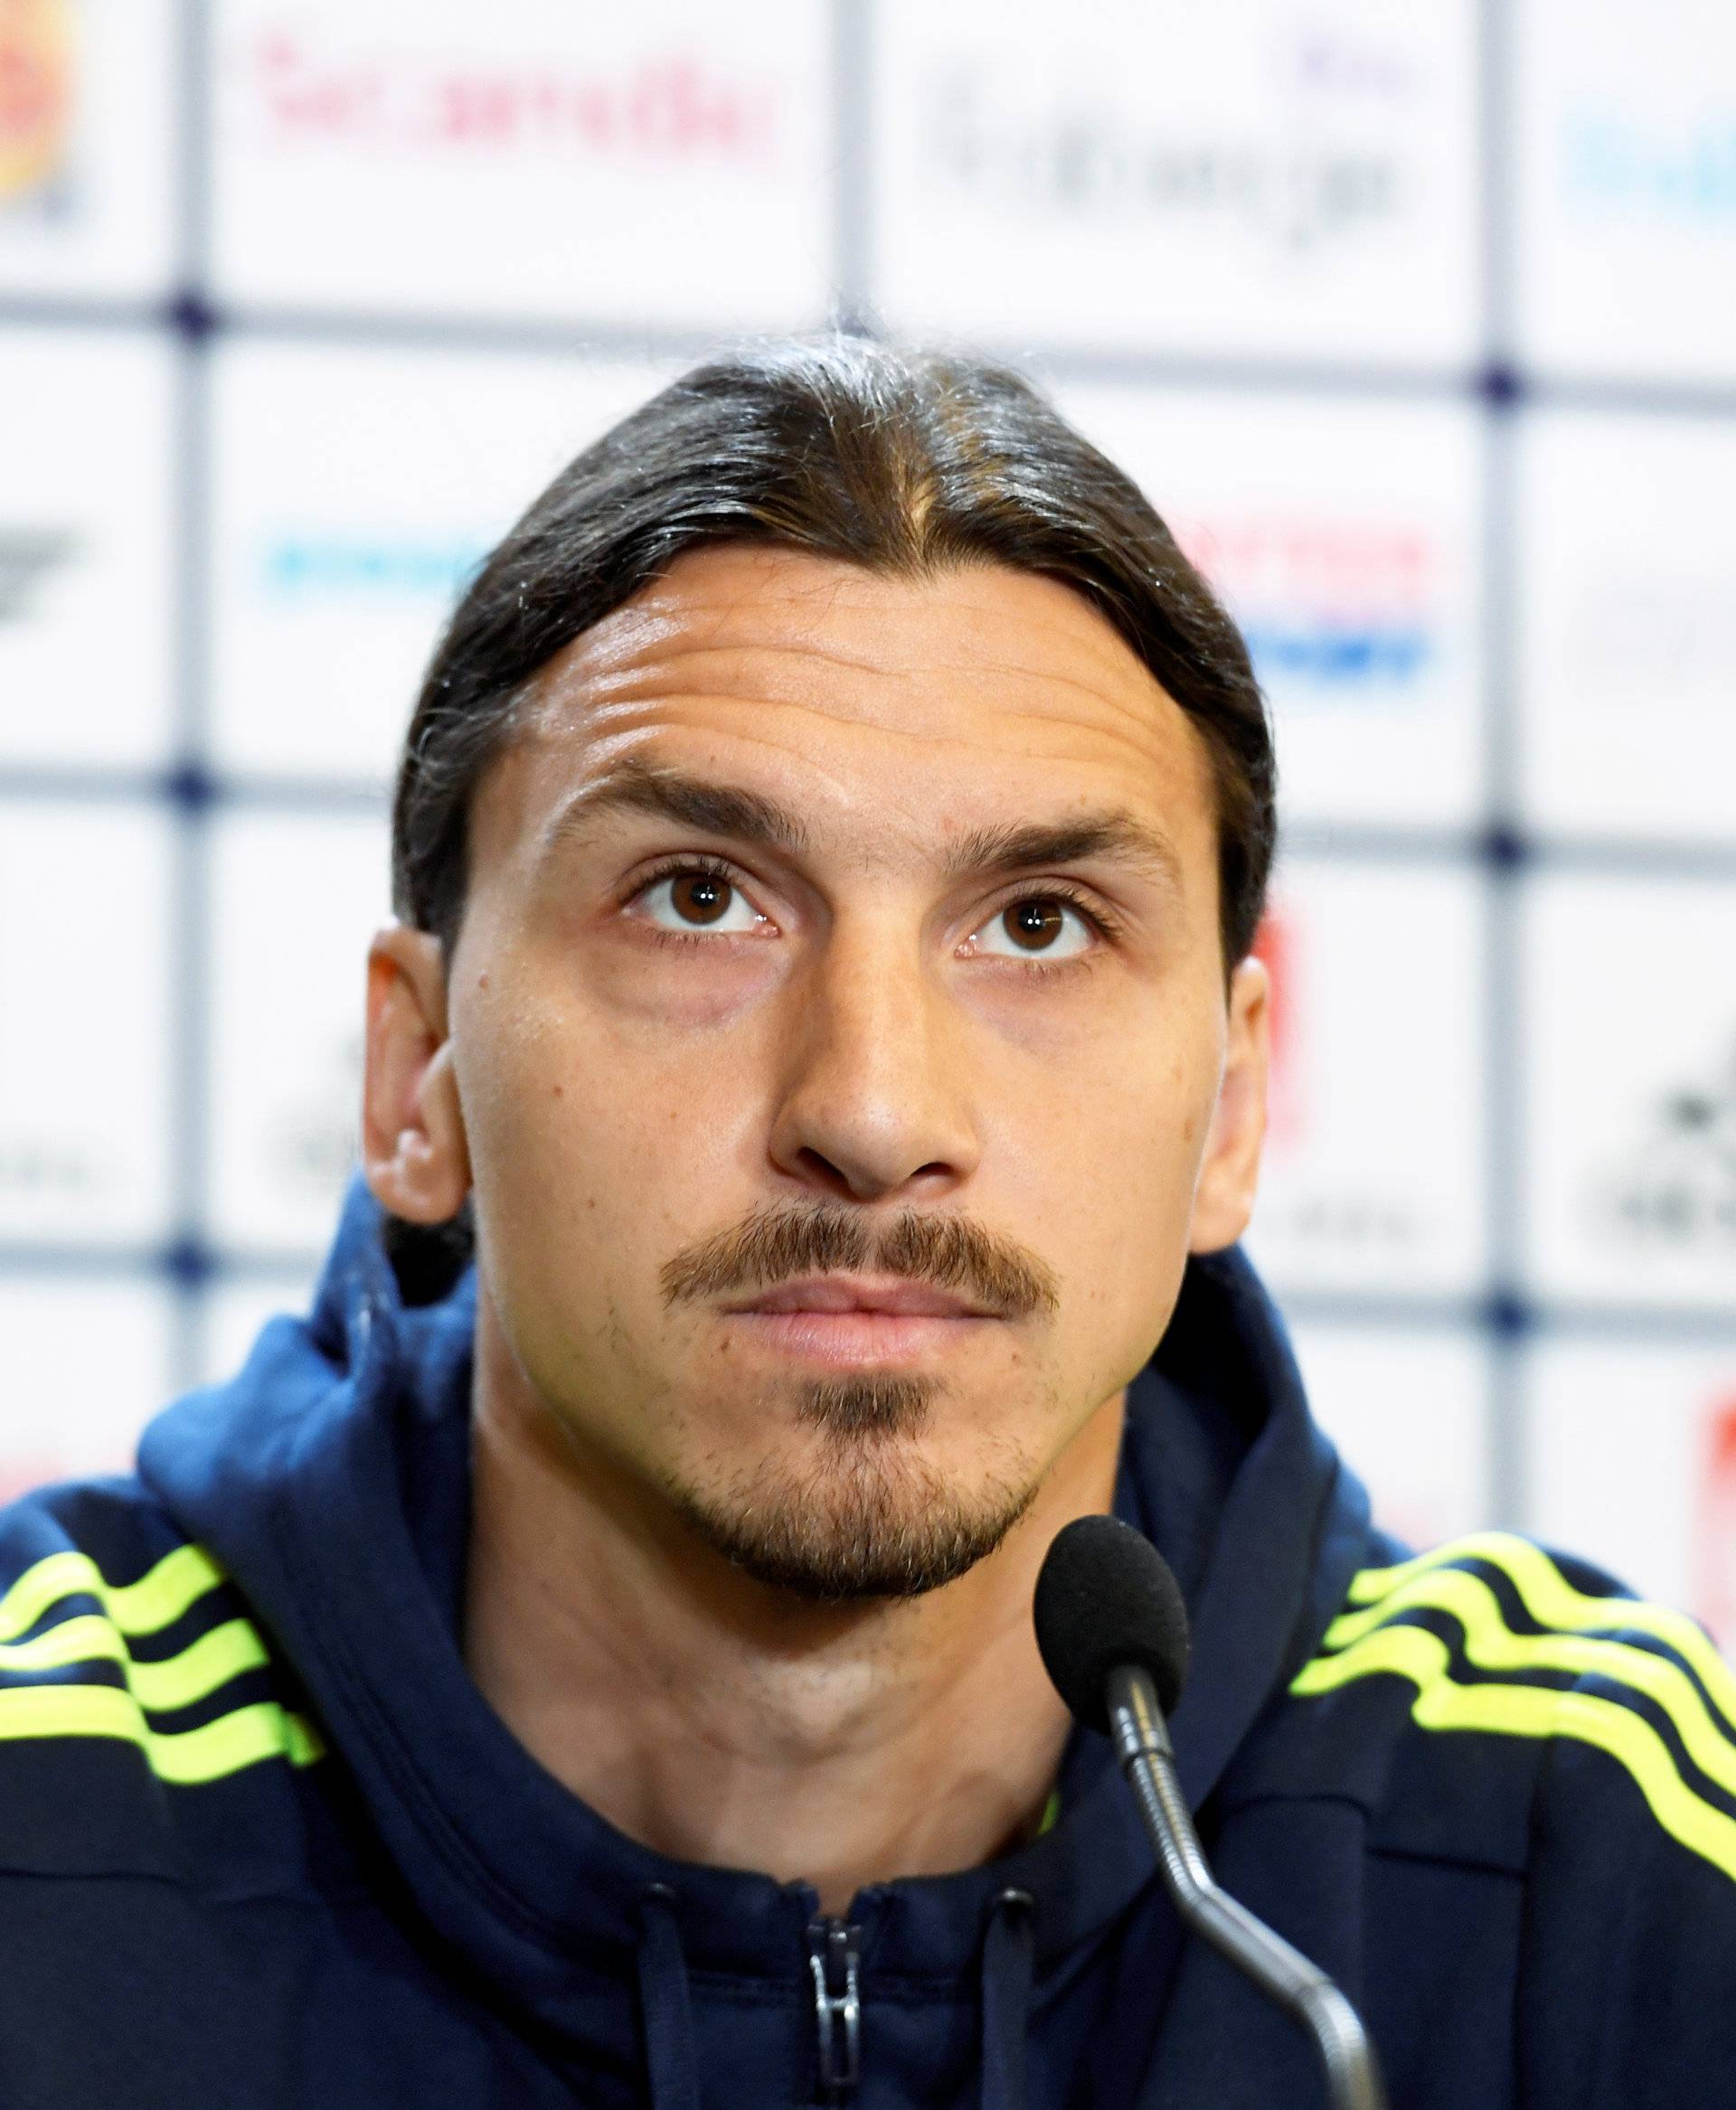 Sweden's forward and team captain Zlatan Ibrahimovic attends a press conference in Bastad